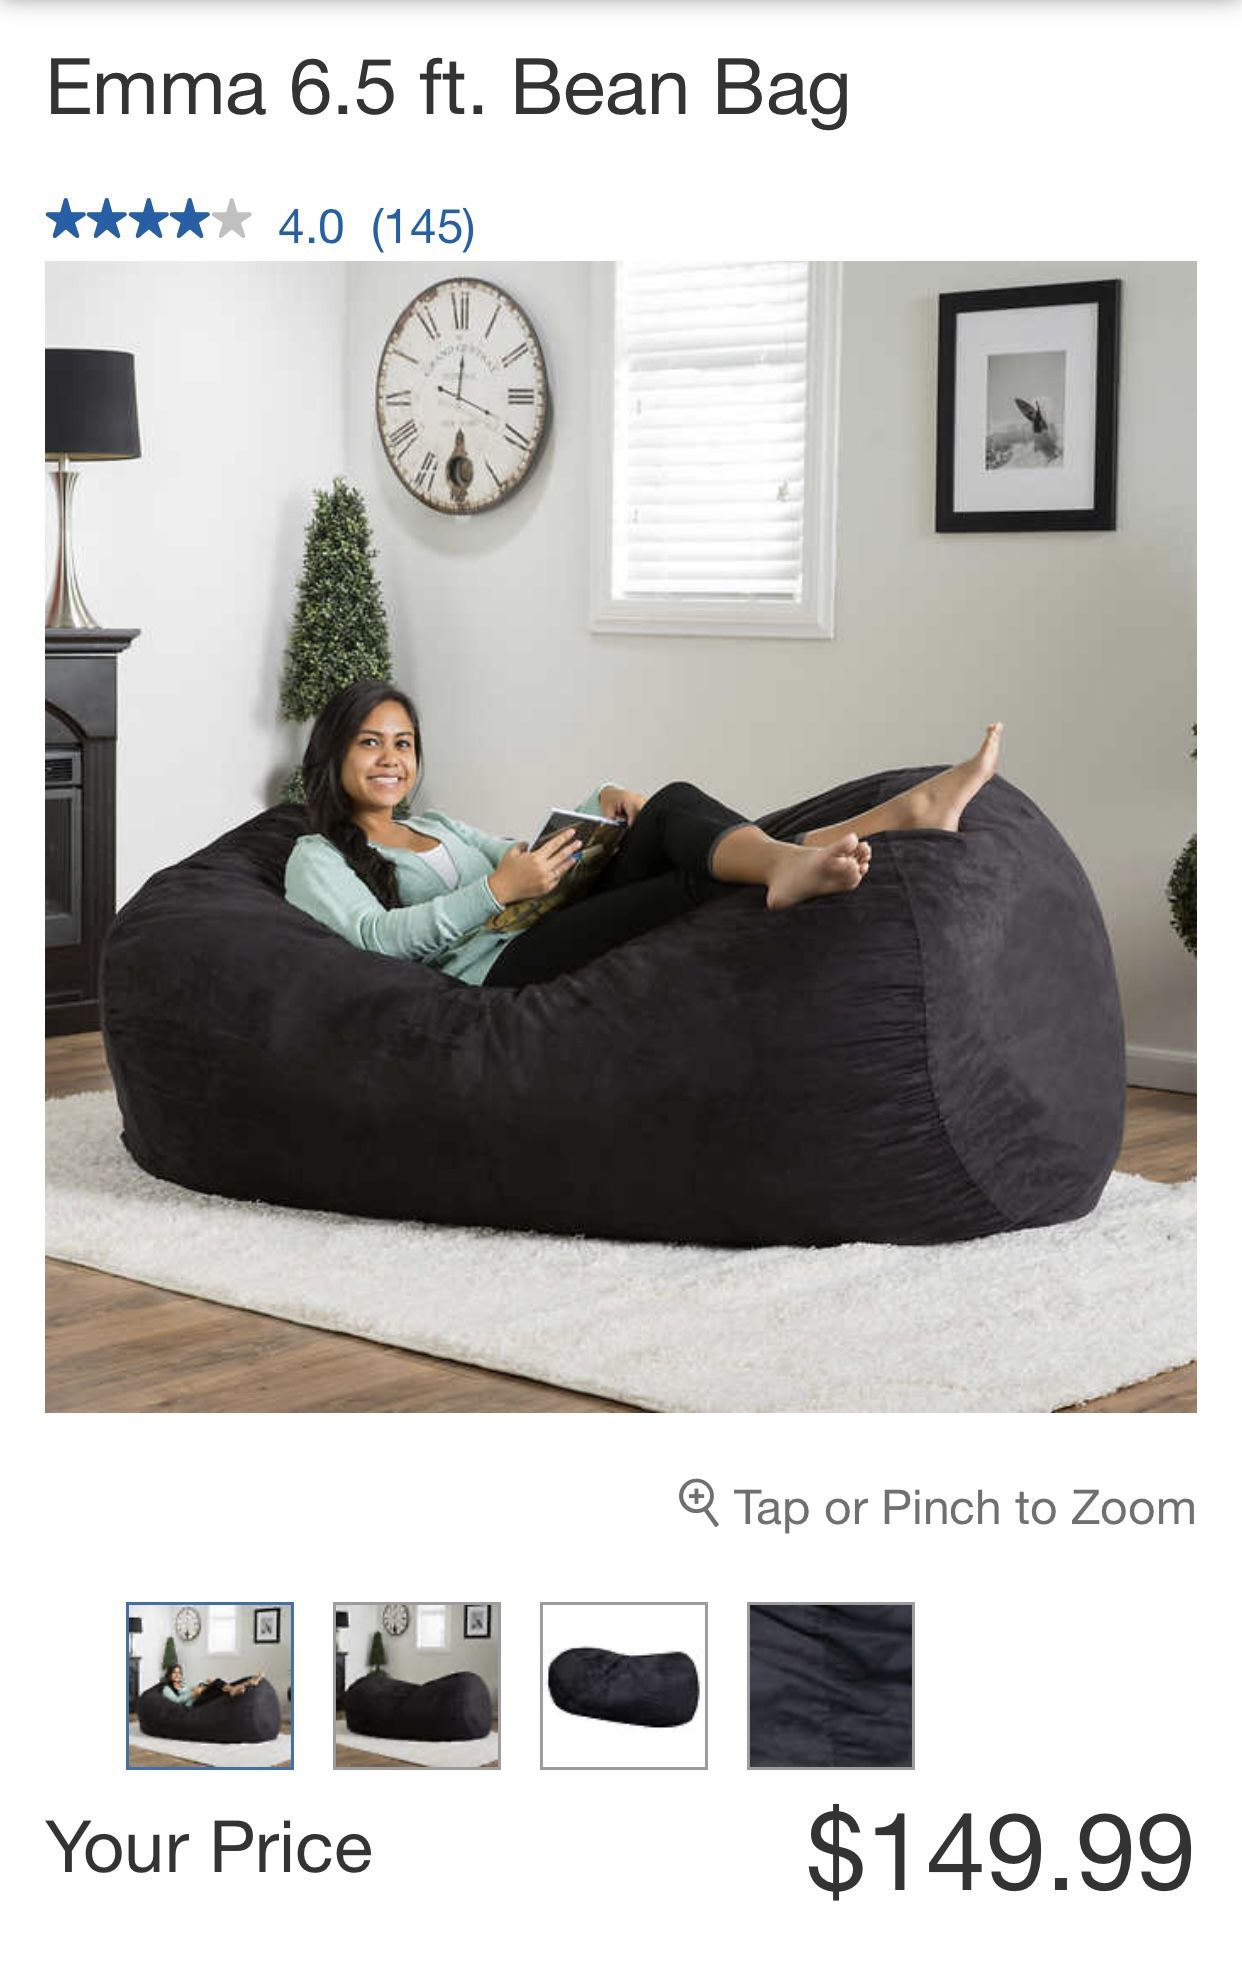 Large Bean Bag, Bought From Costco